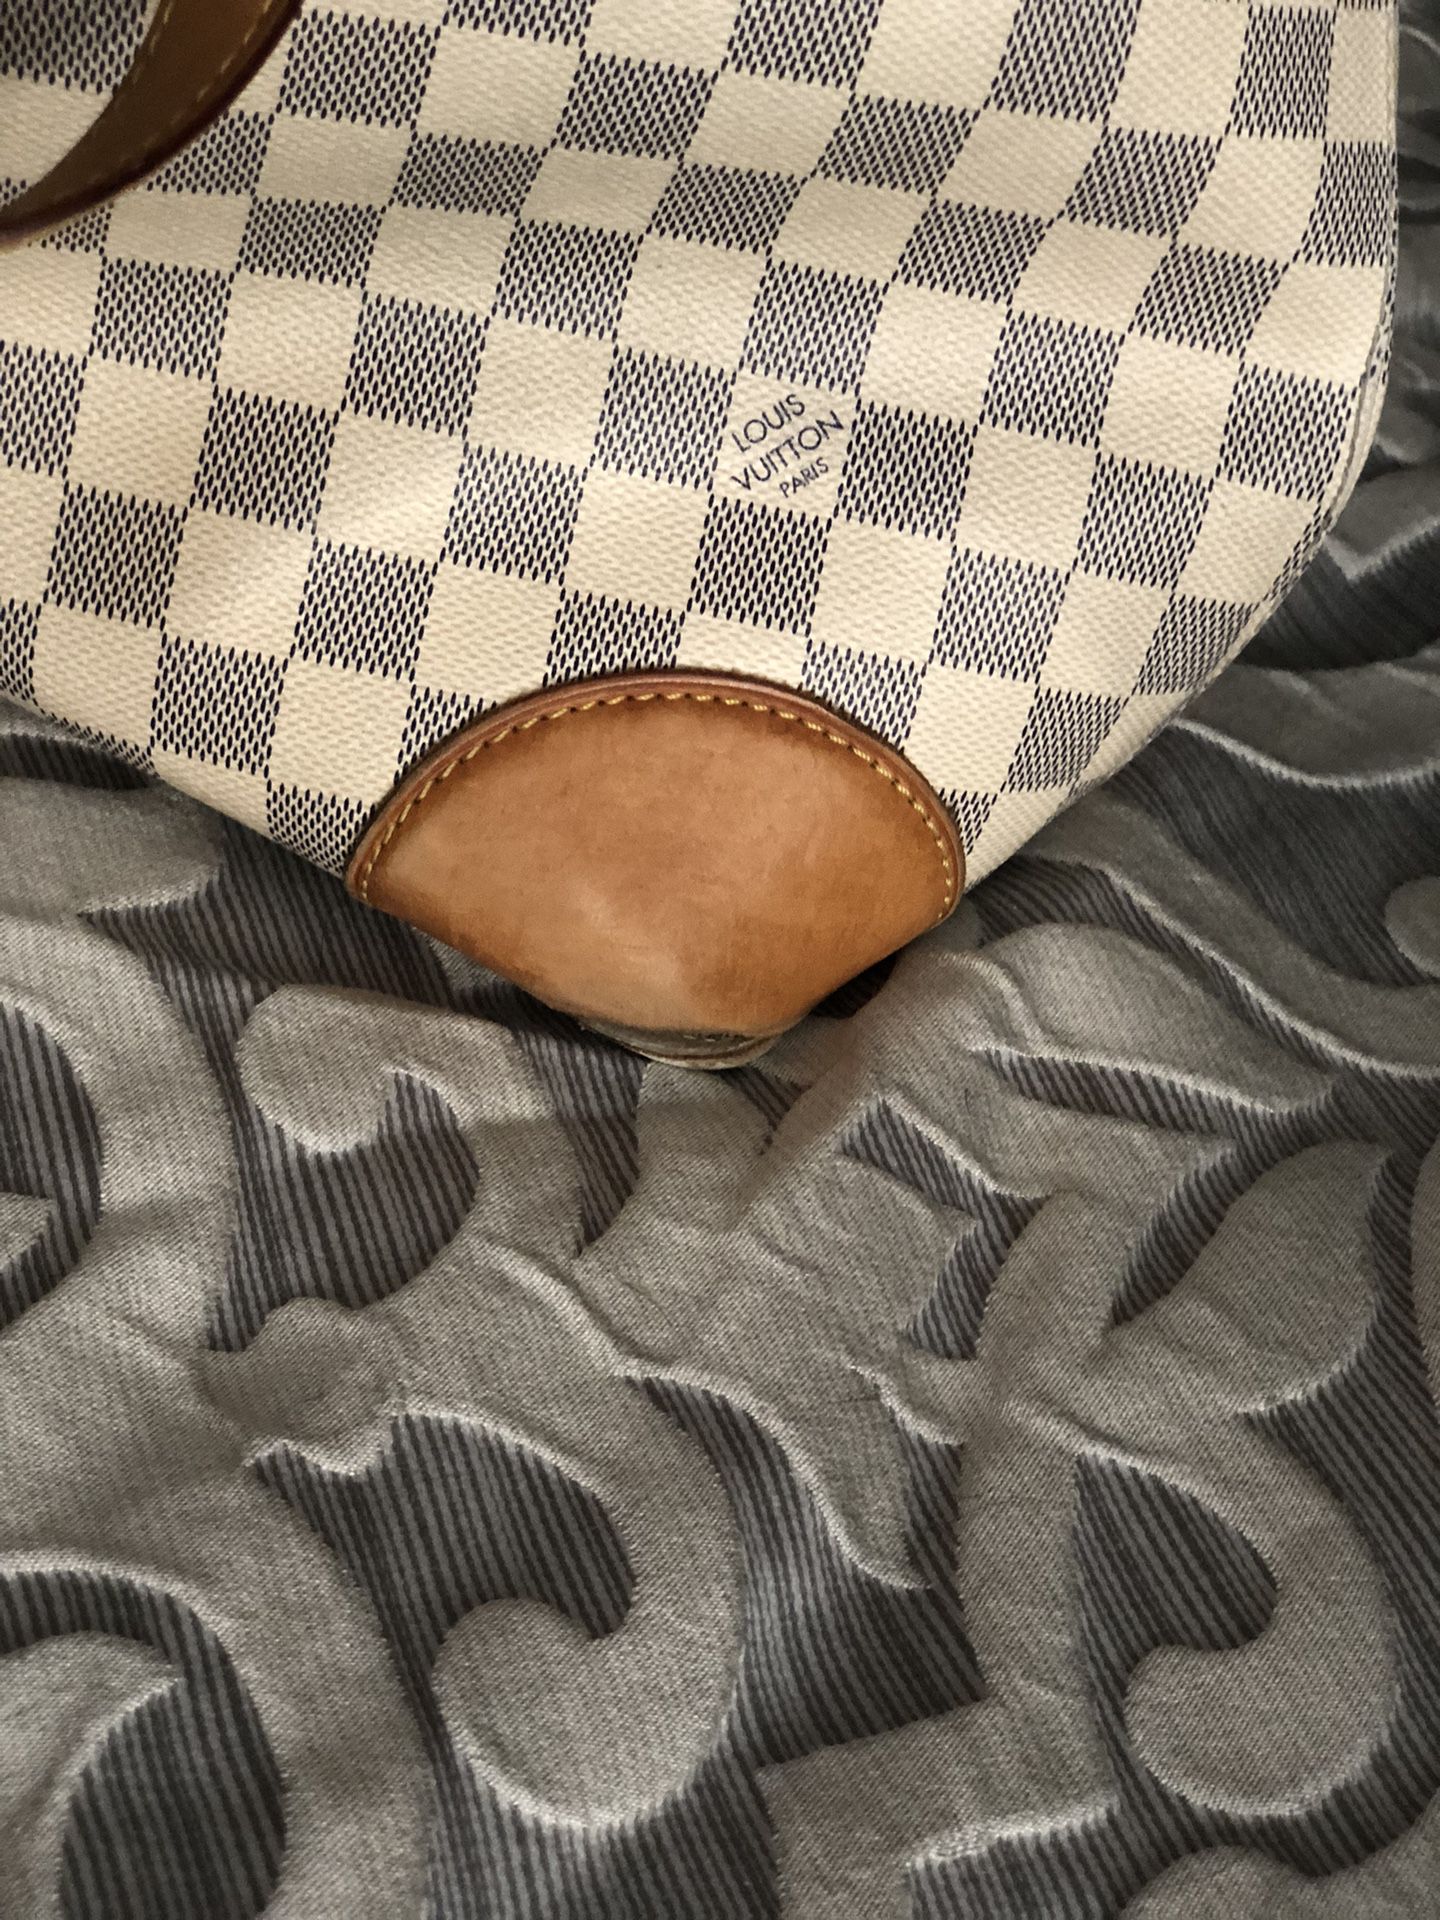 Louis Vuitton white checkered bag real for Sale in Cincinnati, OH - OfferUp